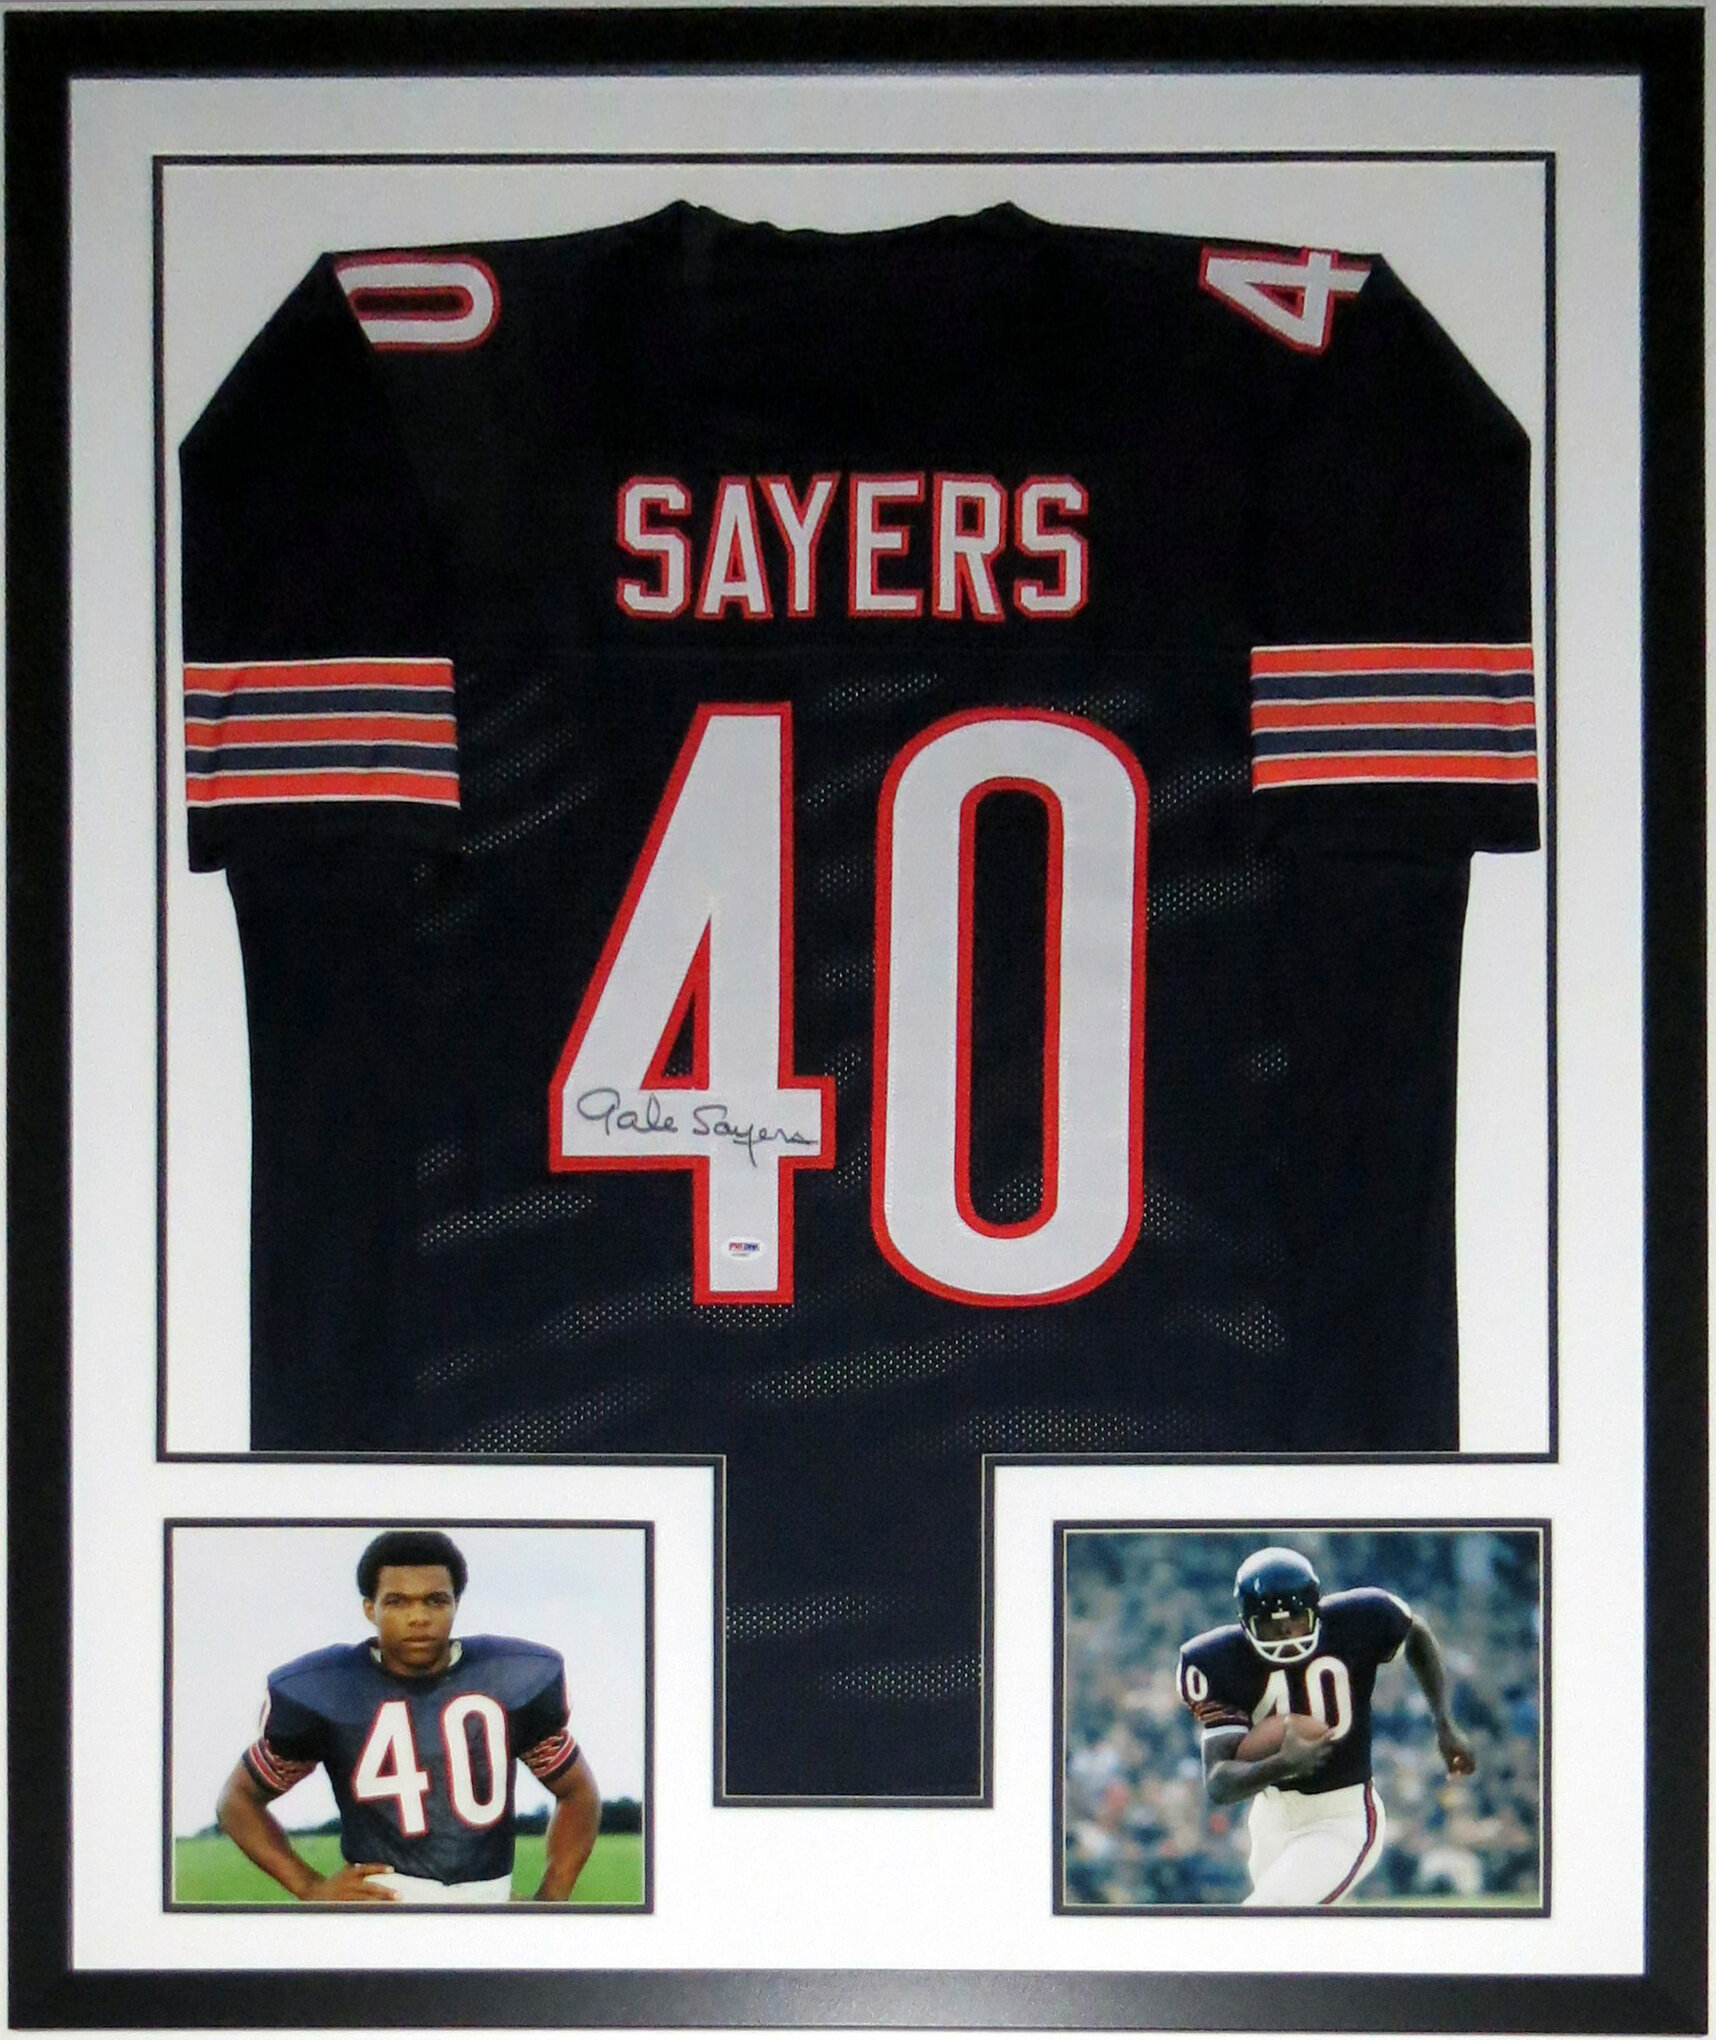 Bleachers Sports Music & Framing — Gale Sayers Signed Chicago Bears Jersey  - PSA DNA COA Authenticated - Professionally Framed